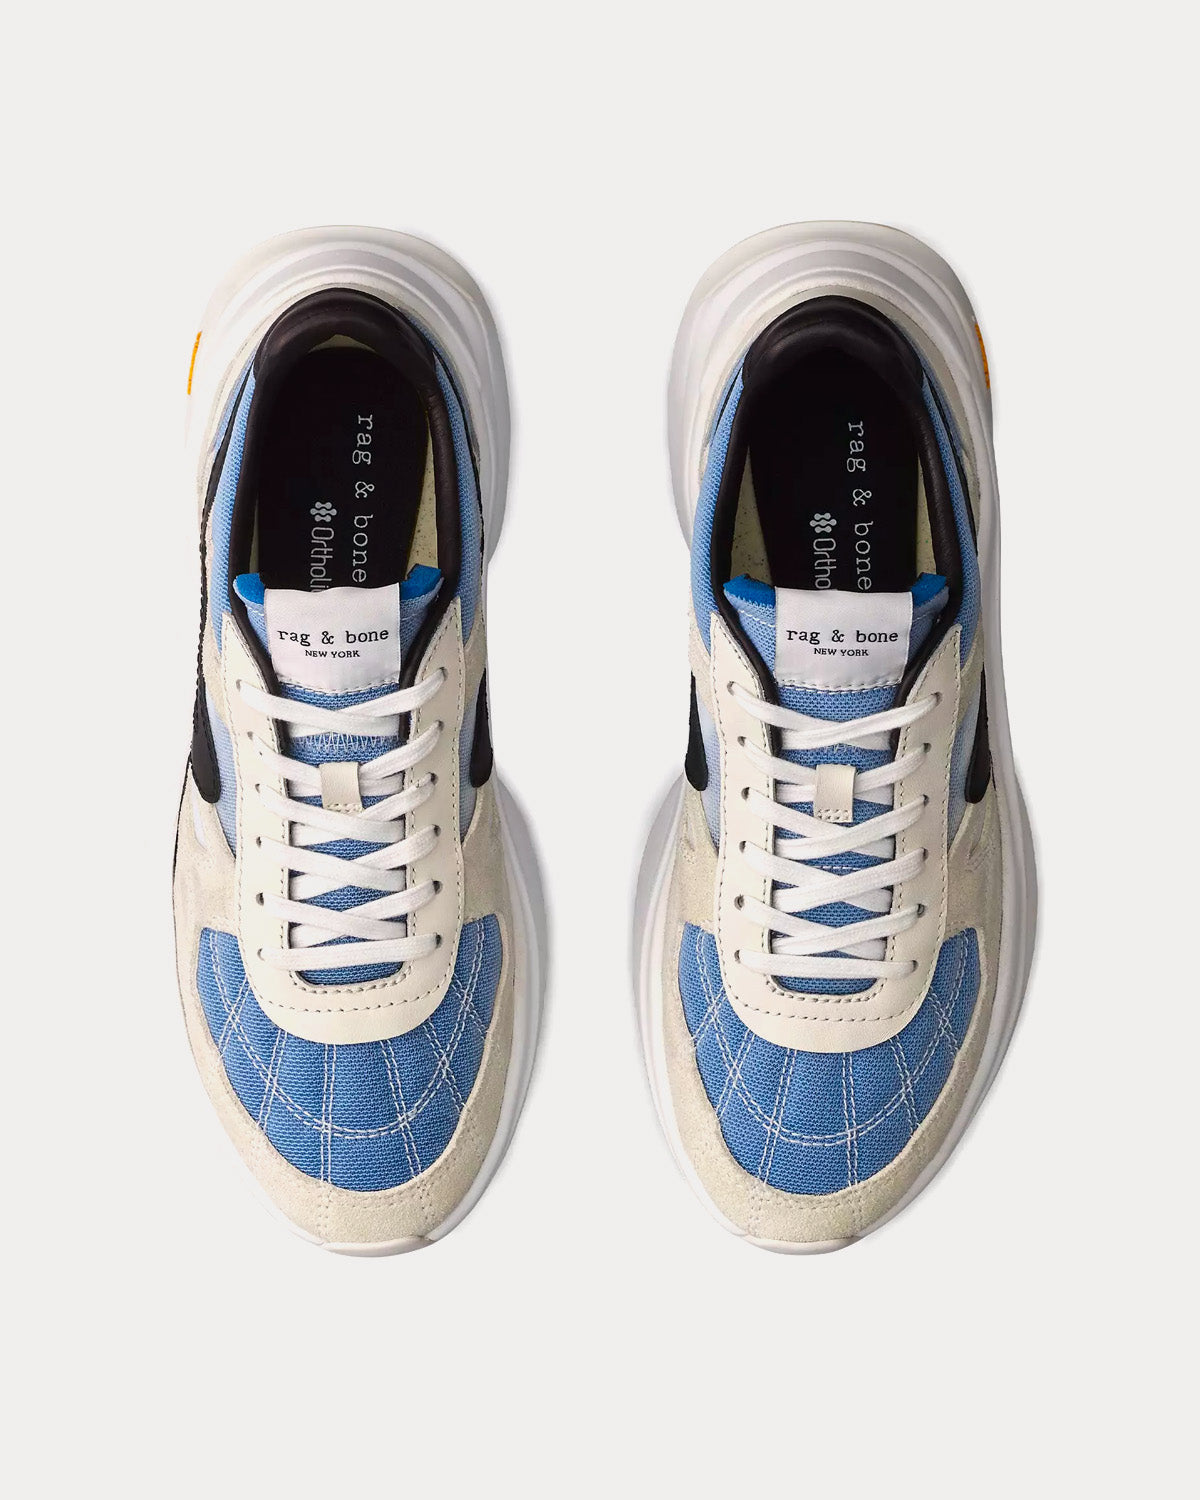 Rag & Bone - RB Legacy Runner Leather Frost / Blue Low Top Sneakers